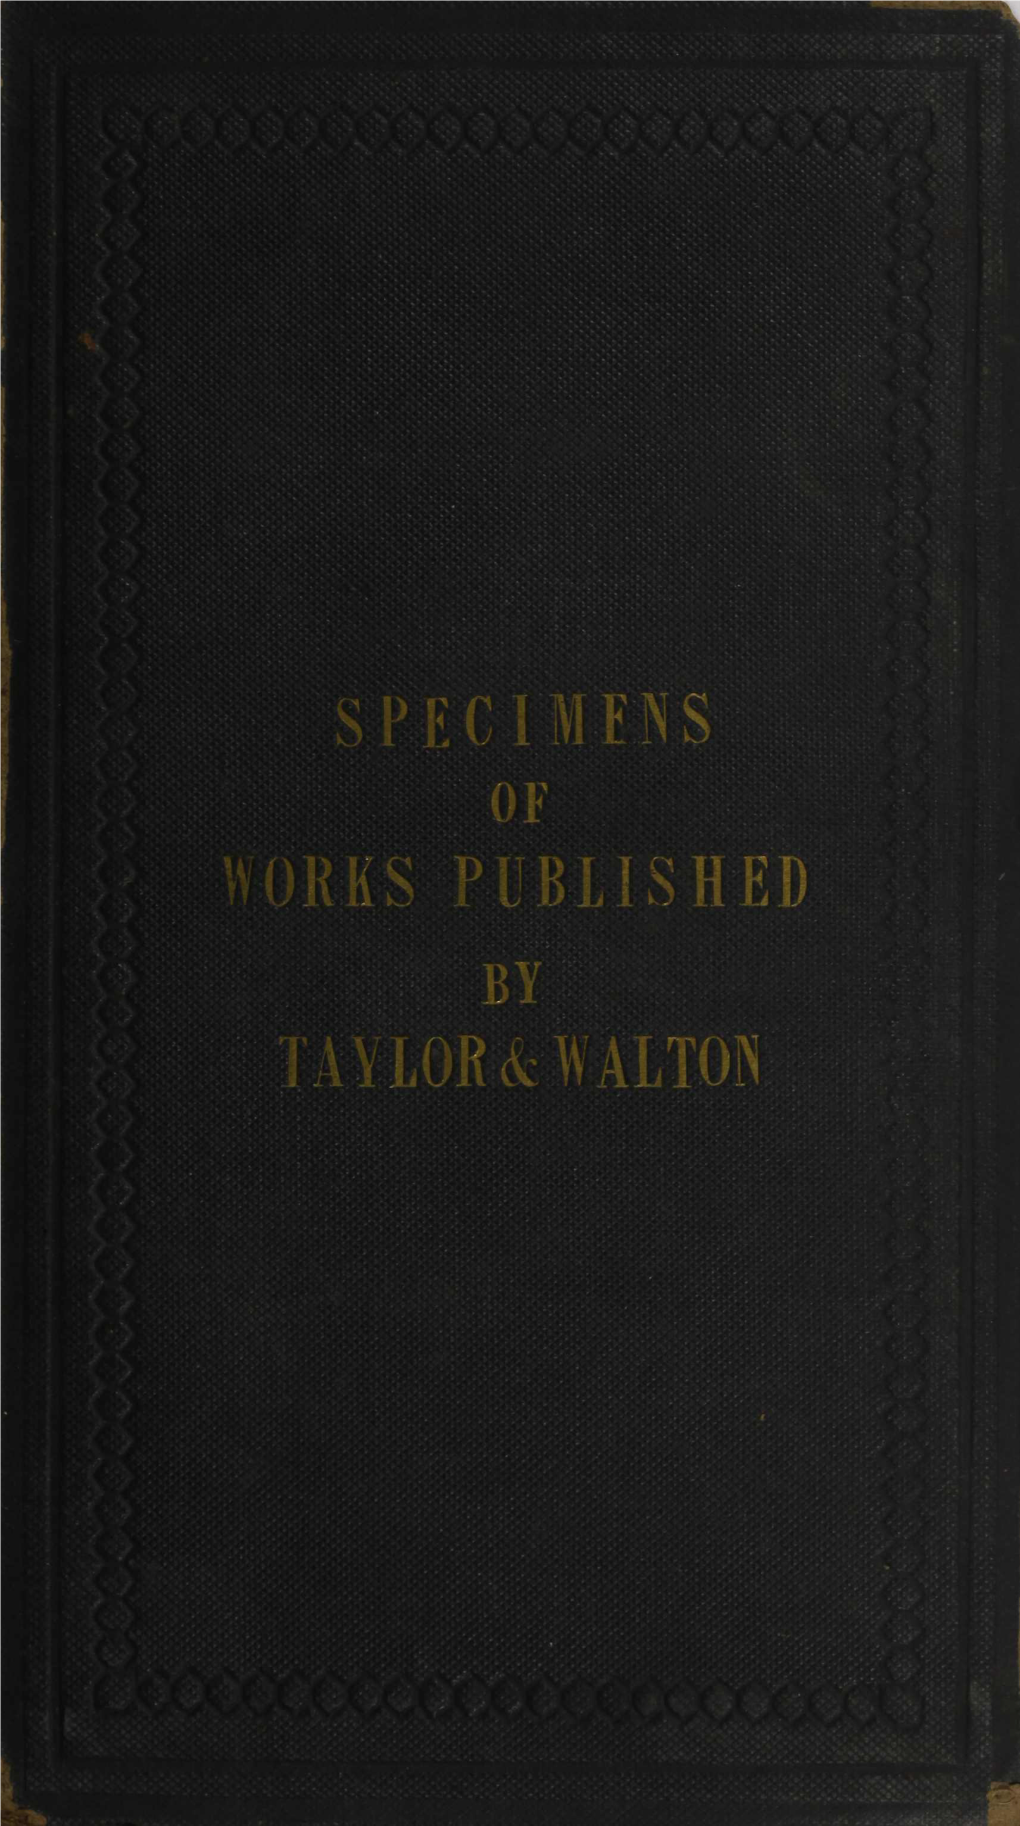 S Pec I Mens "Of Works Published by Iaylor&Walton